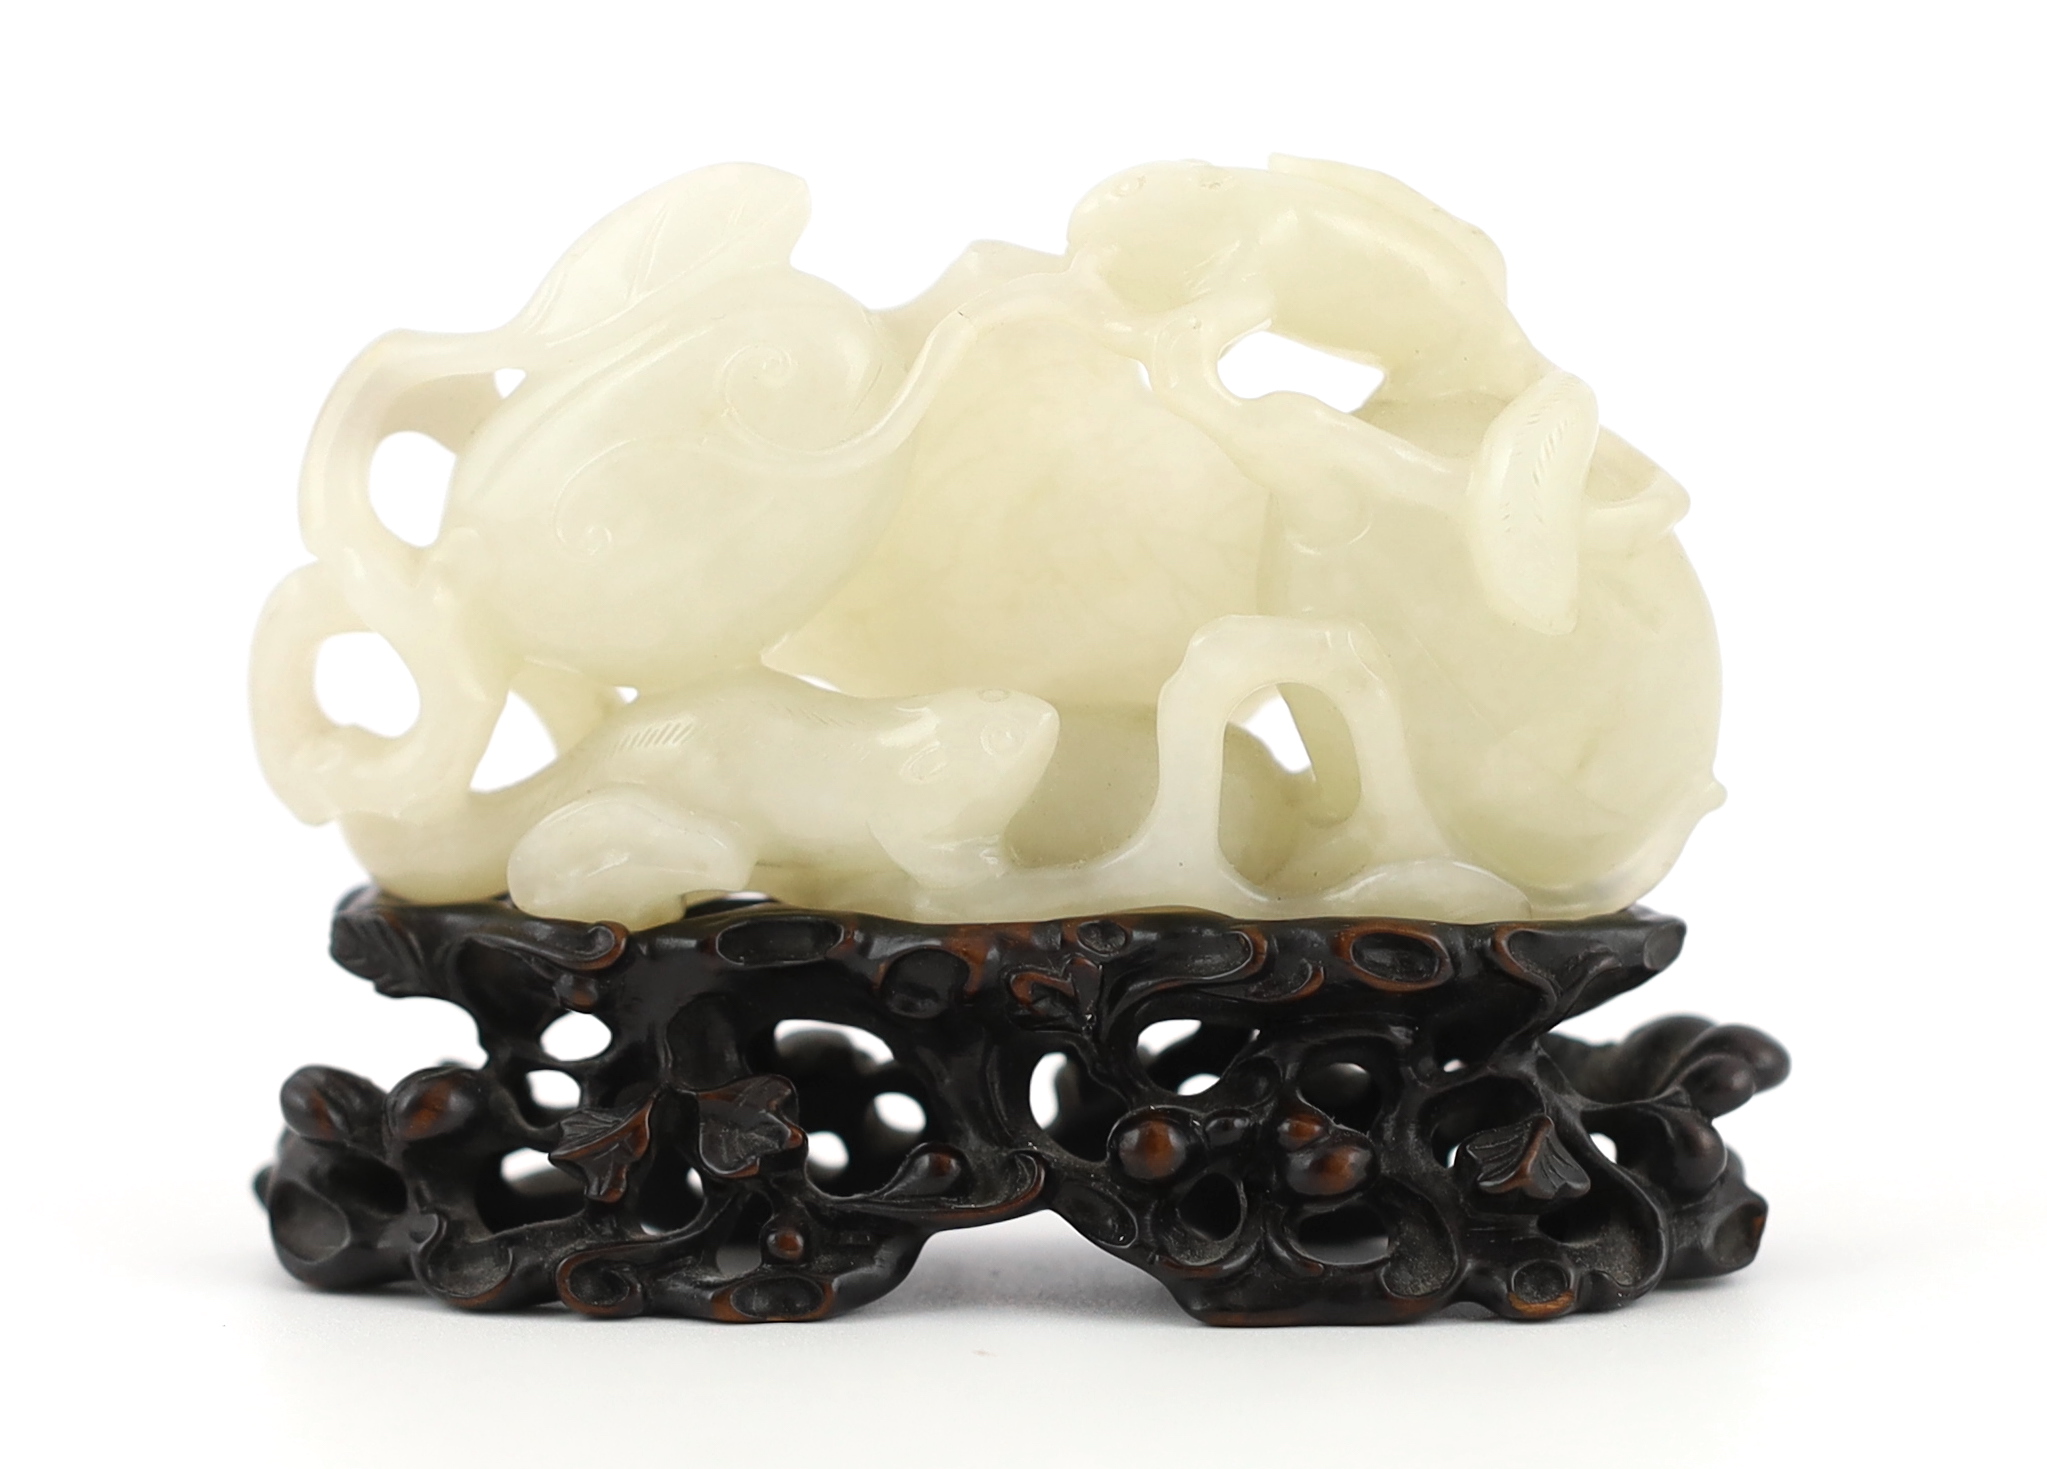 A Chinese white jade carving of a cluster of melons, 18th century